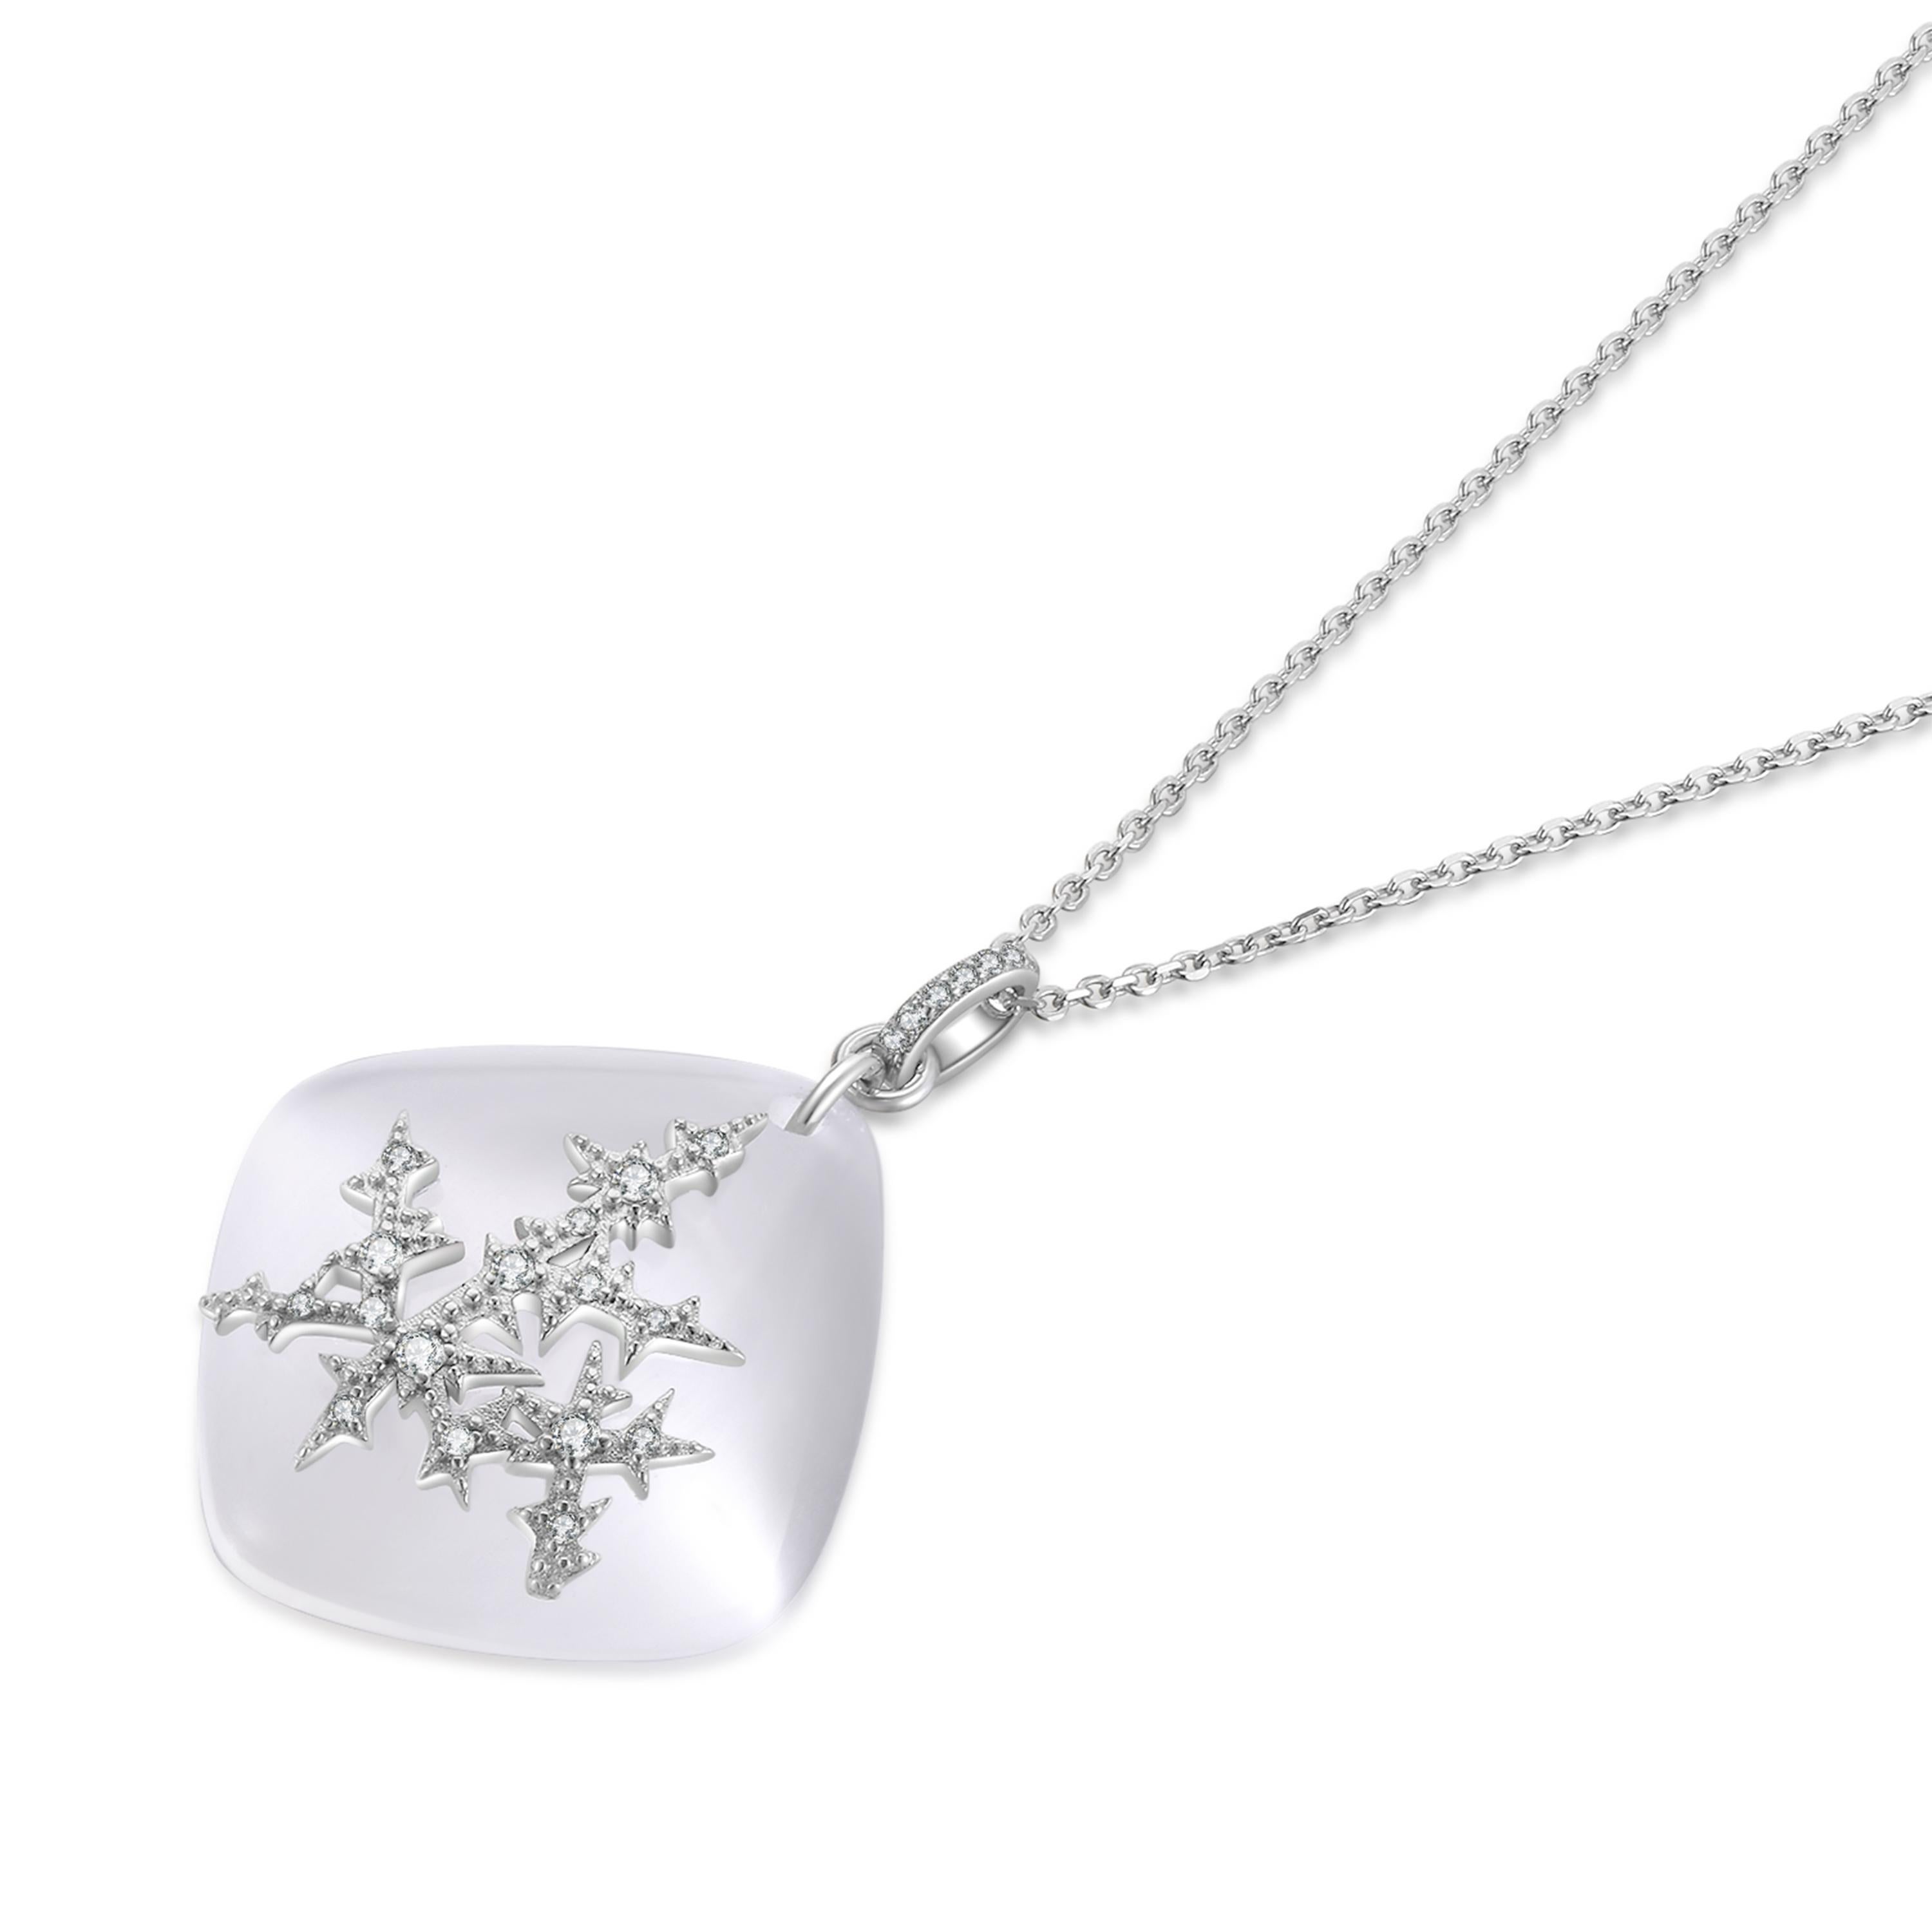 The exquisite limited edition Snowflake Pendant – a beautiful fusion of elegance and winter enchantment. This enchanting piece features a milky white kite-cut cat’s eye stone, delicately adorned with a meticulously crafted snowflake overlay, set